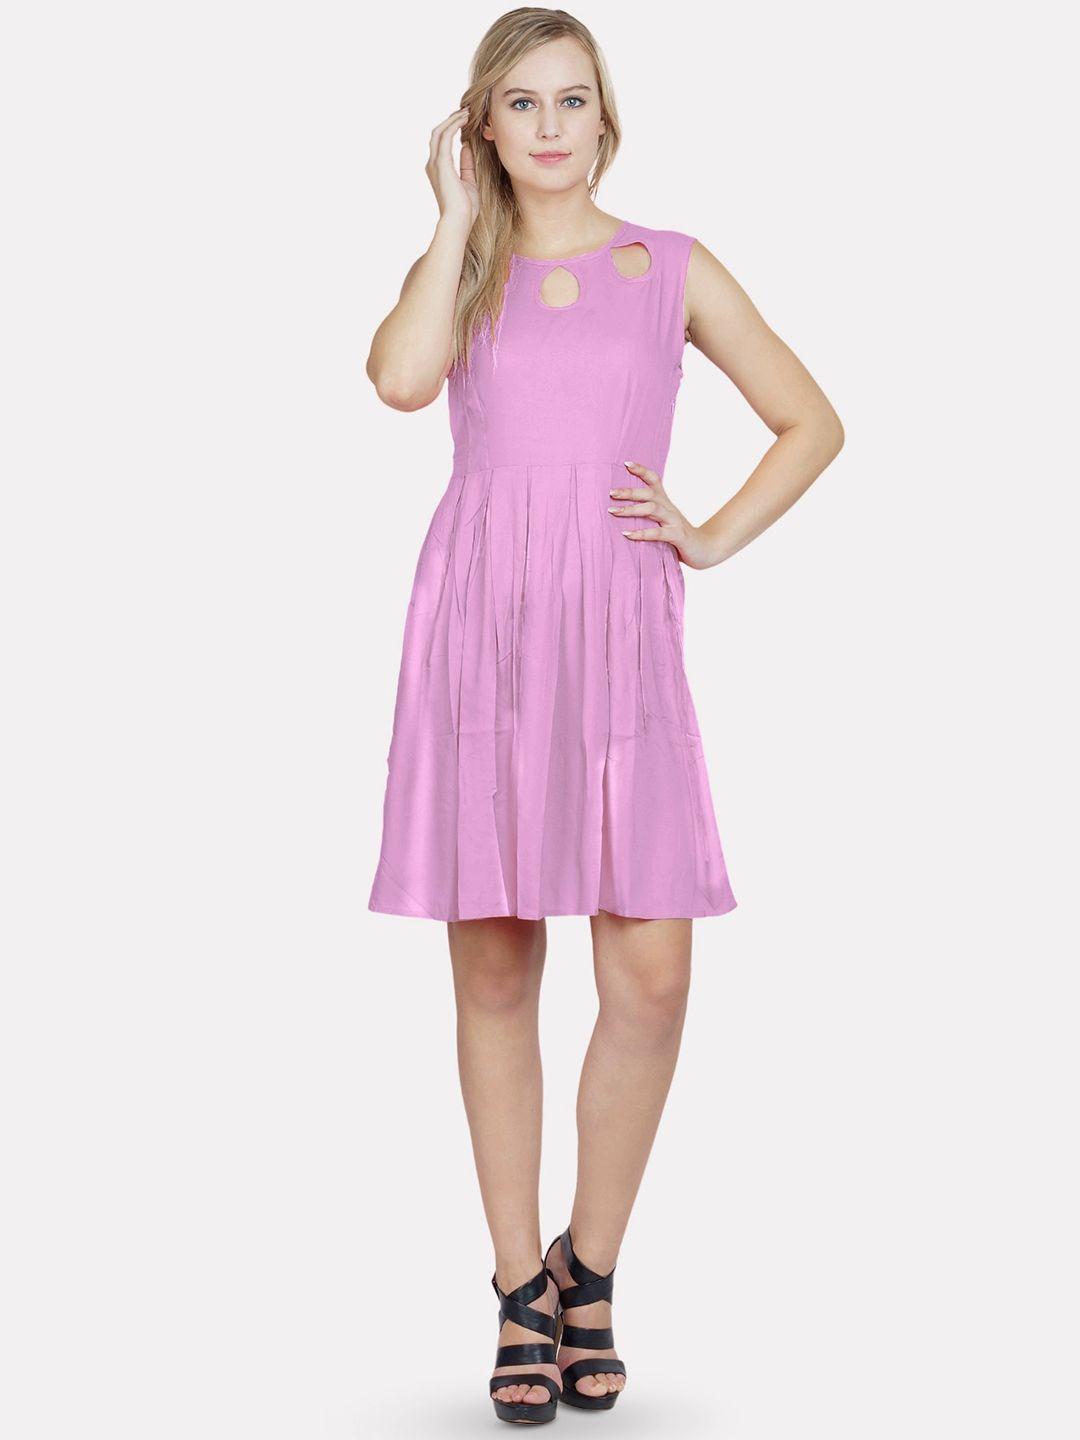 patrorna pleated cut-outs detail round neck sleeveless cotton casual fit & flare dress